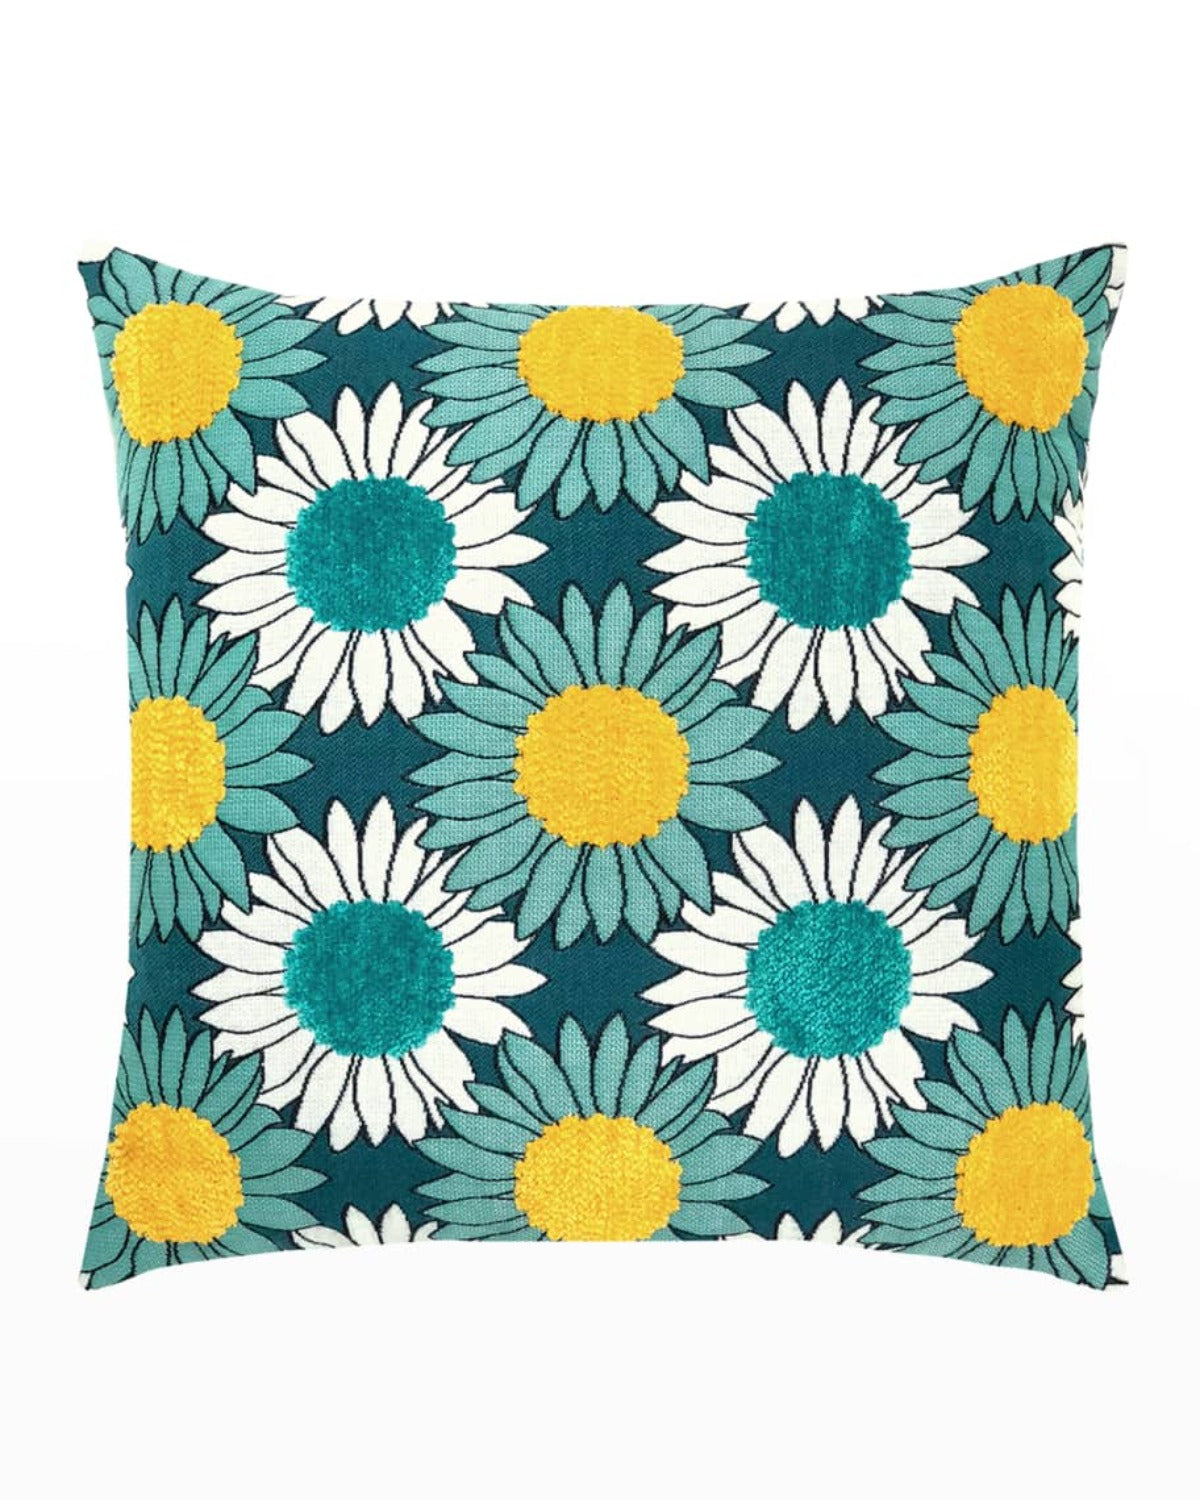 Elaine Smith Sunflower Bloom 20 inch Square Pillow Throw Pillows 12030987